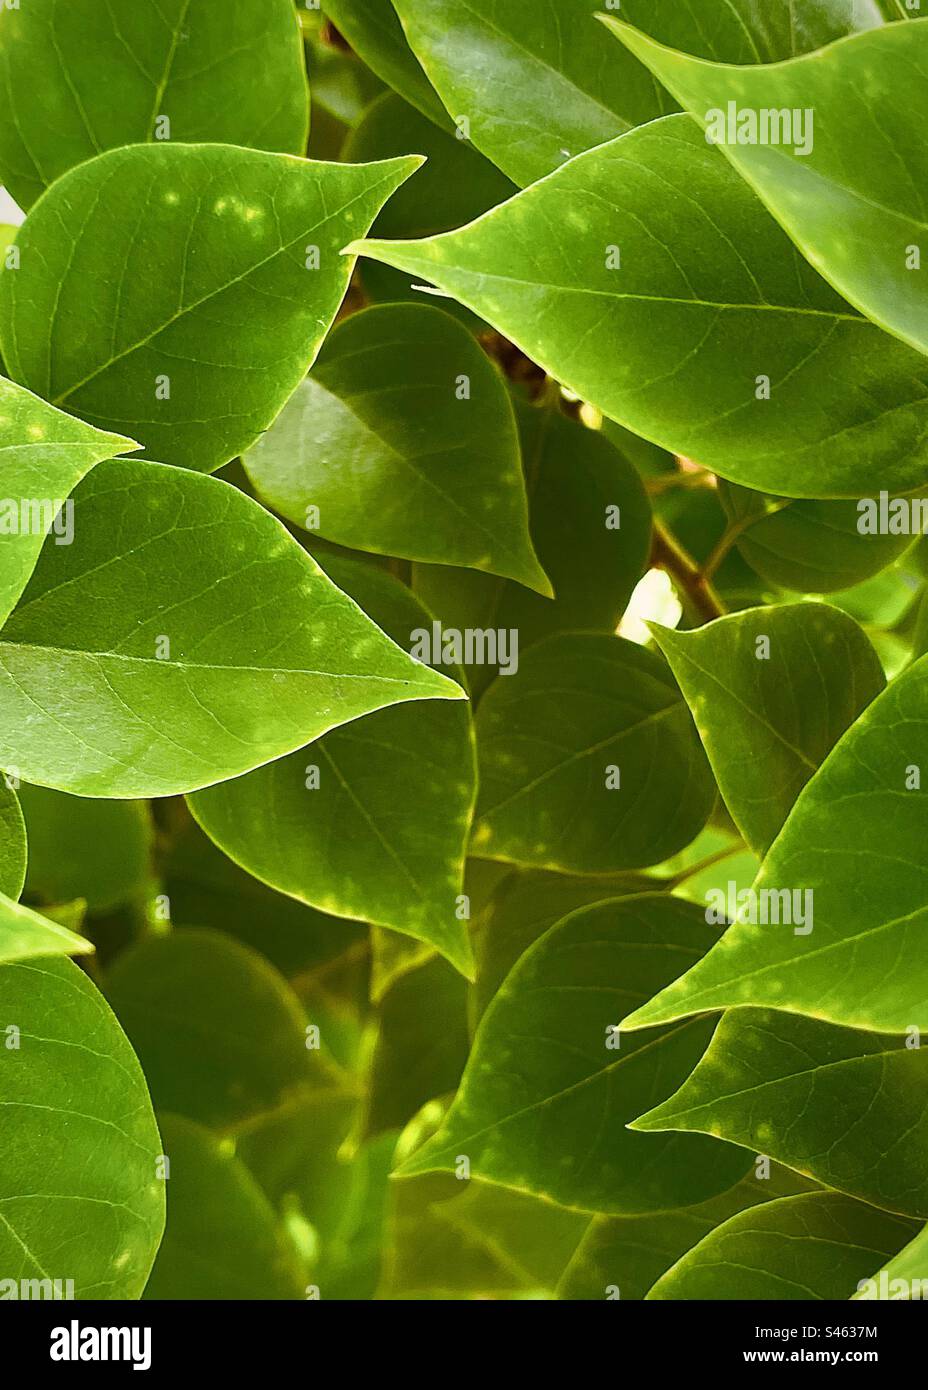 Outdoors photography of the beautiful green leaves. Stock Photo